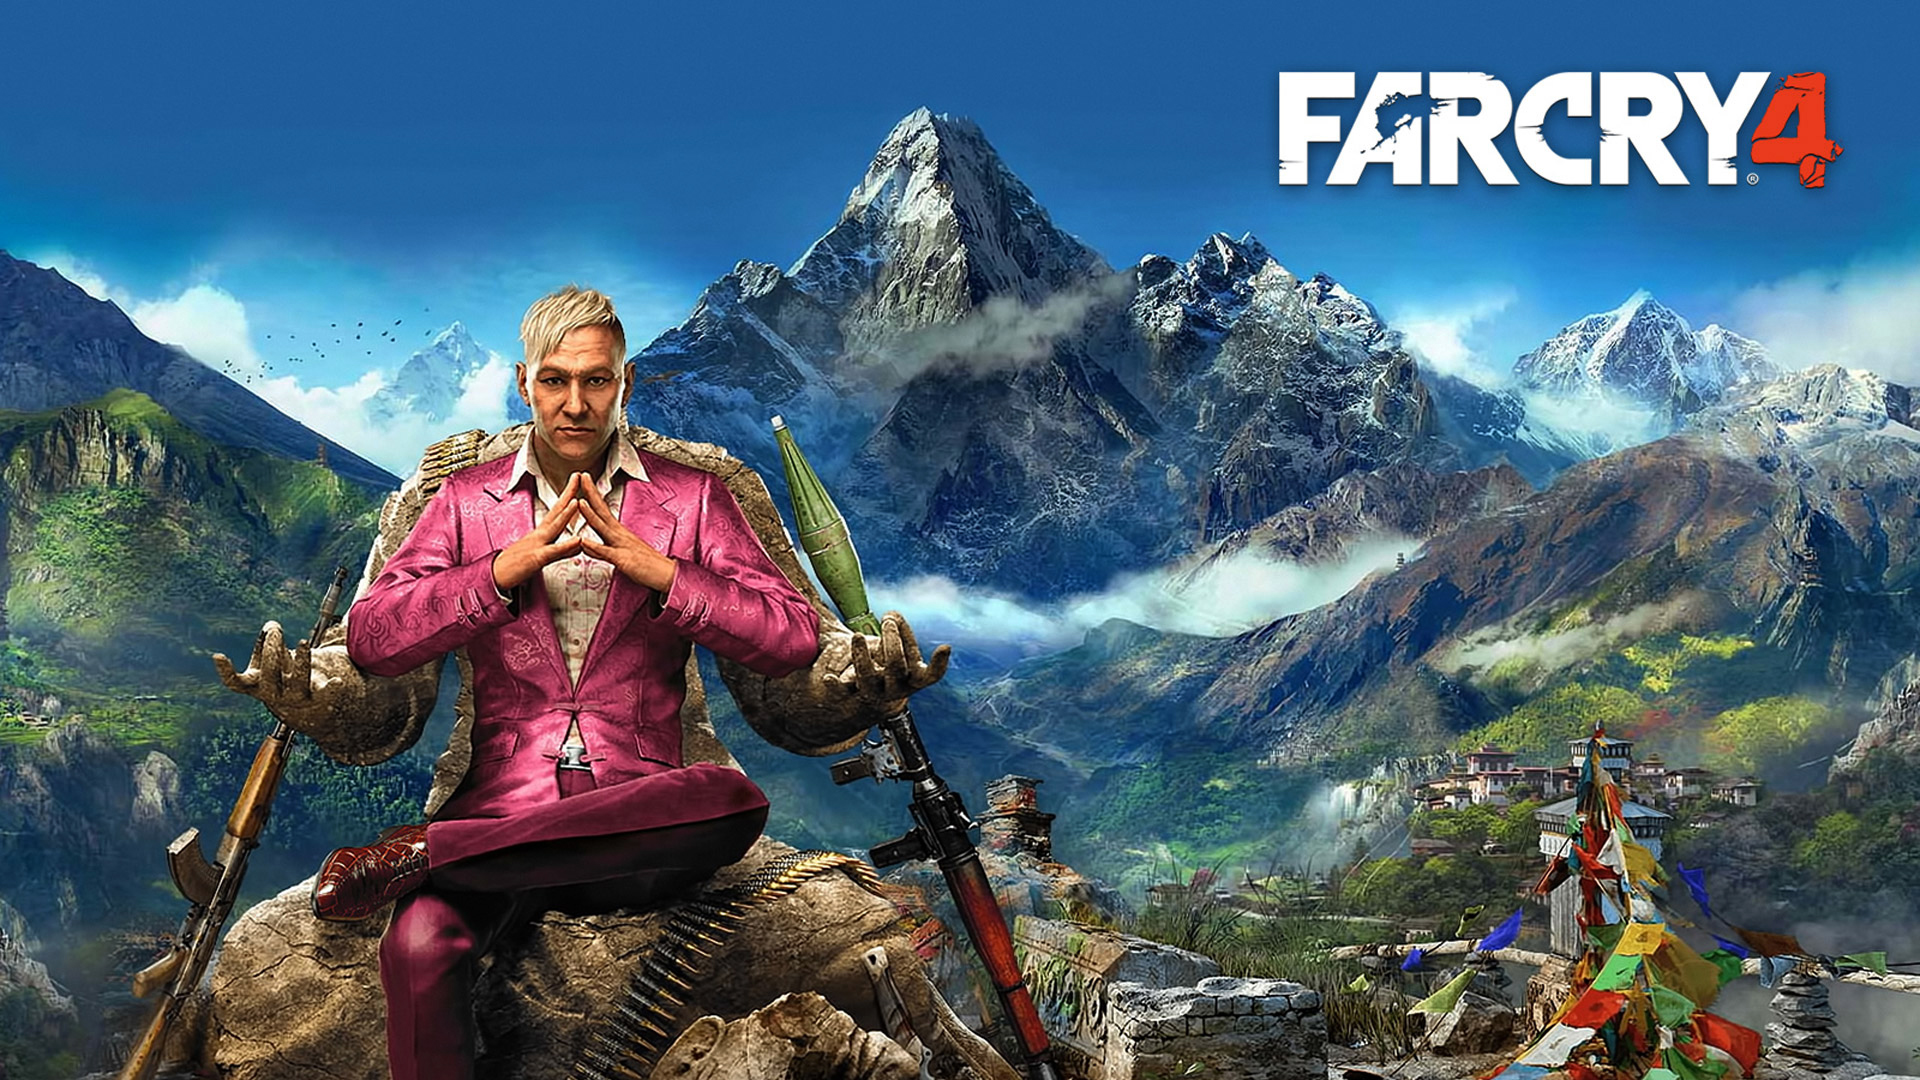 Download The Game Far Cry 2